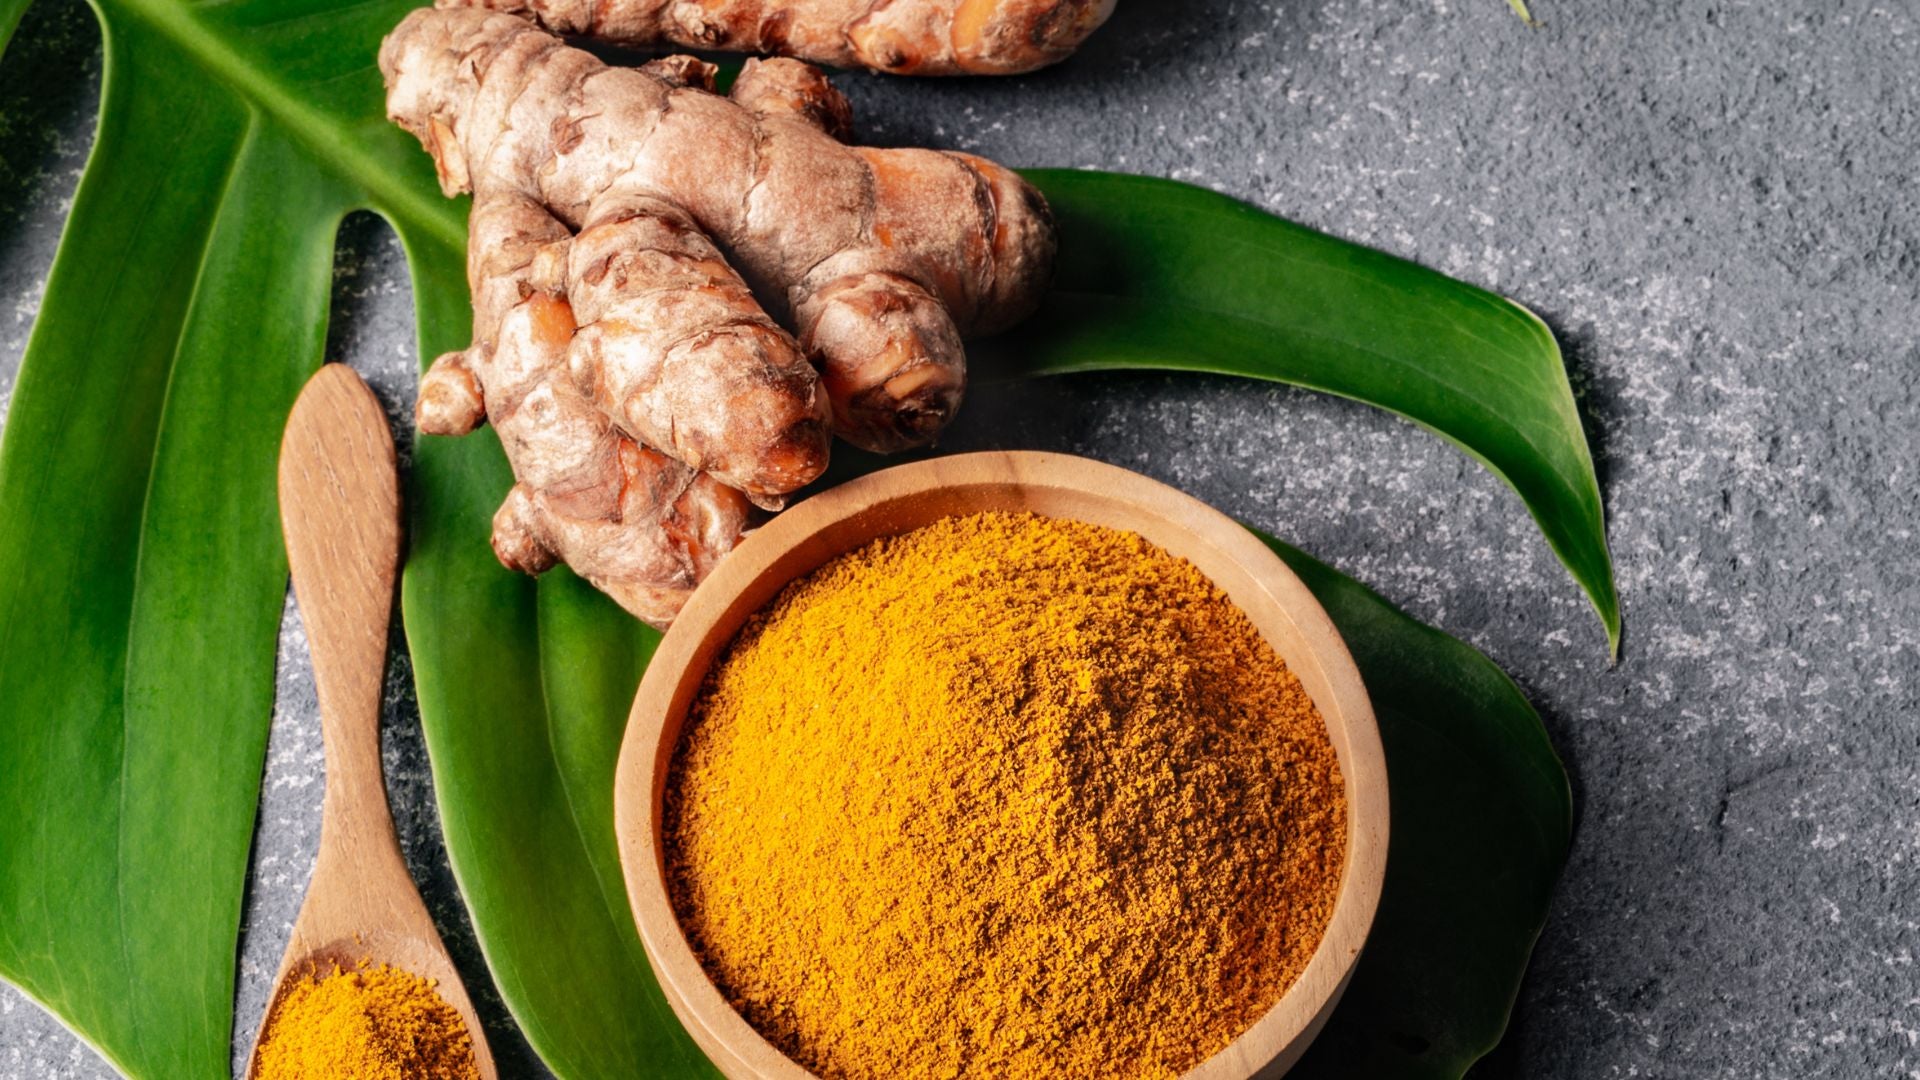 What is best turmeric powder or capsules?